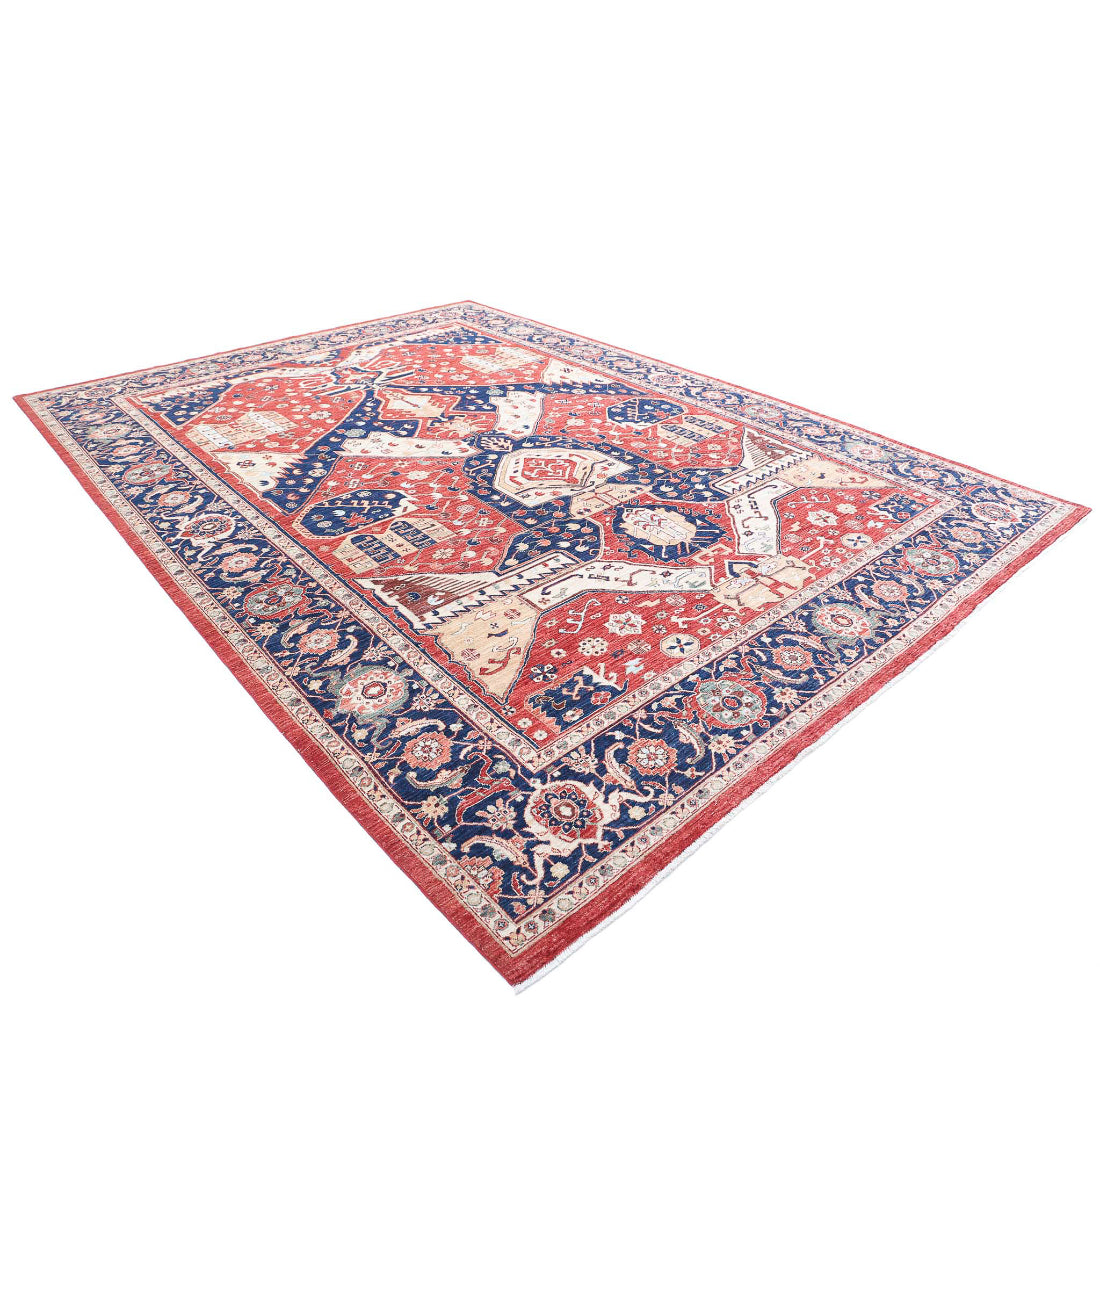 Heriz 10'0'' X 13'0'' Hand-Knotted Wool Rug 10'0'' x 13'0'' (300 X 390) / Red / Blue